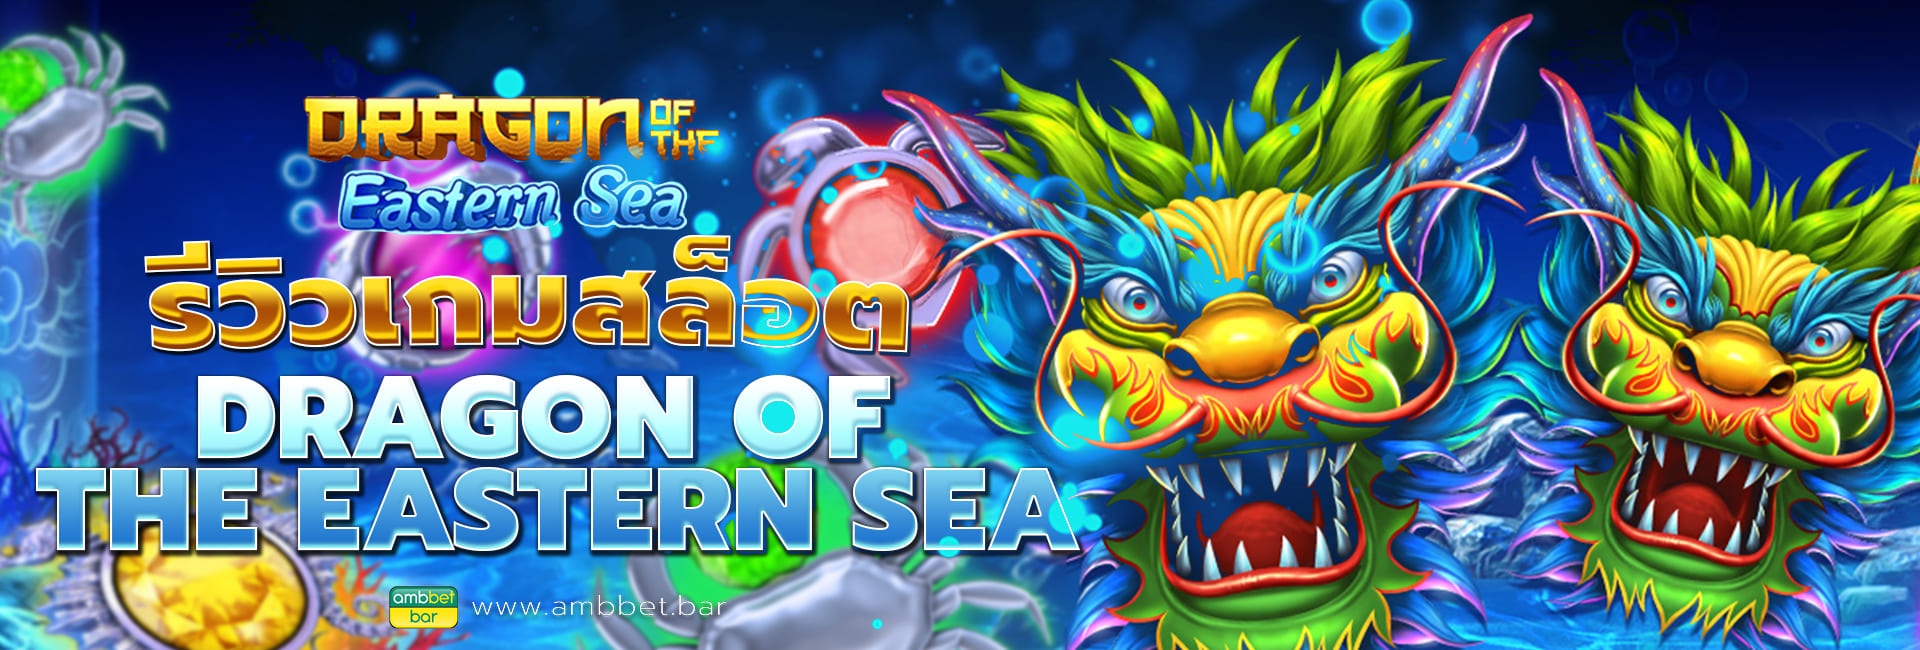 Dragon Of The Eastern Sea banner